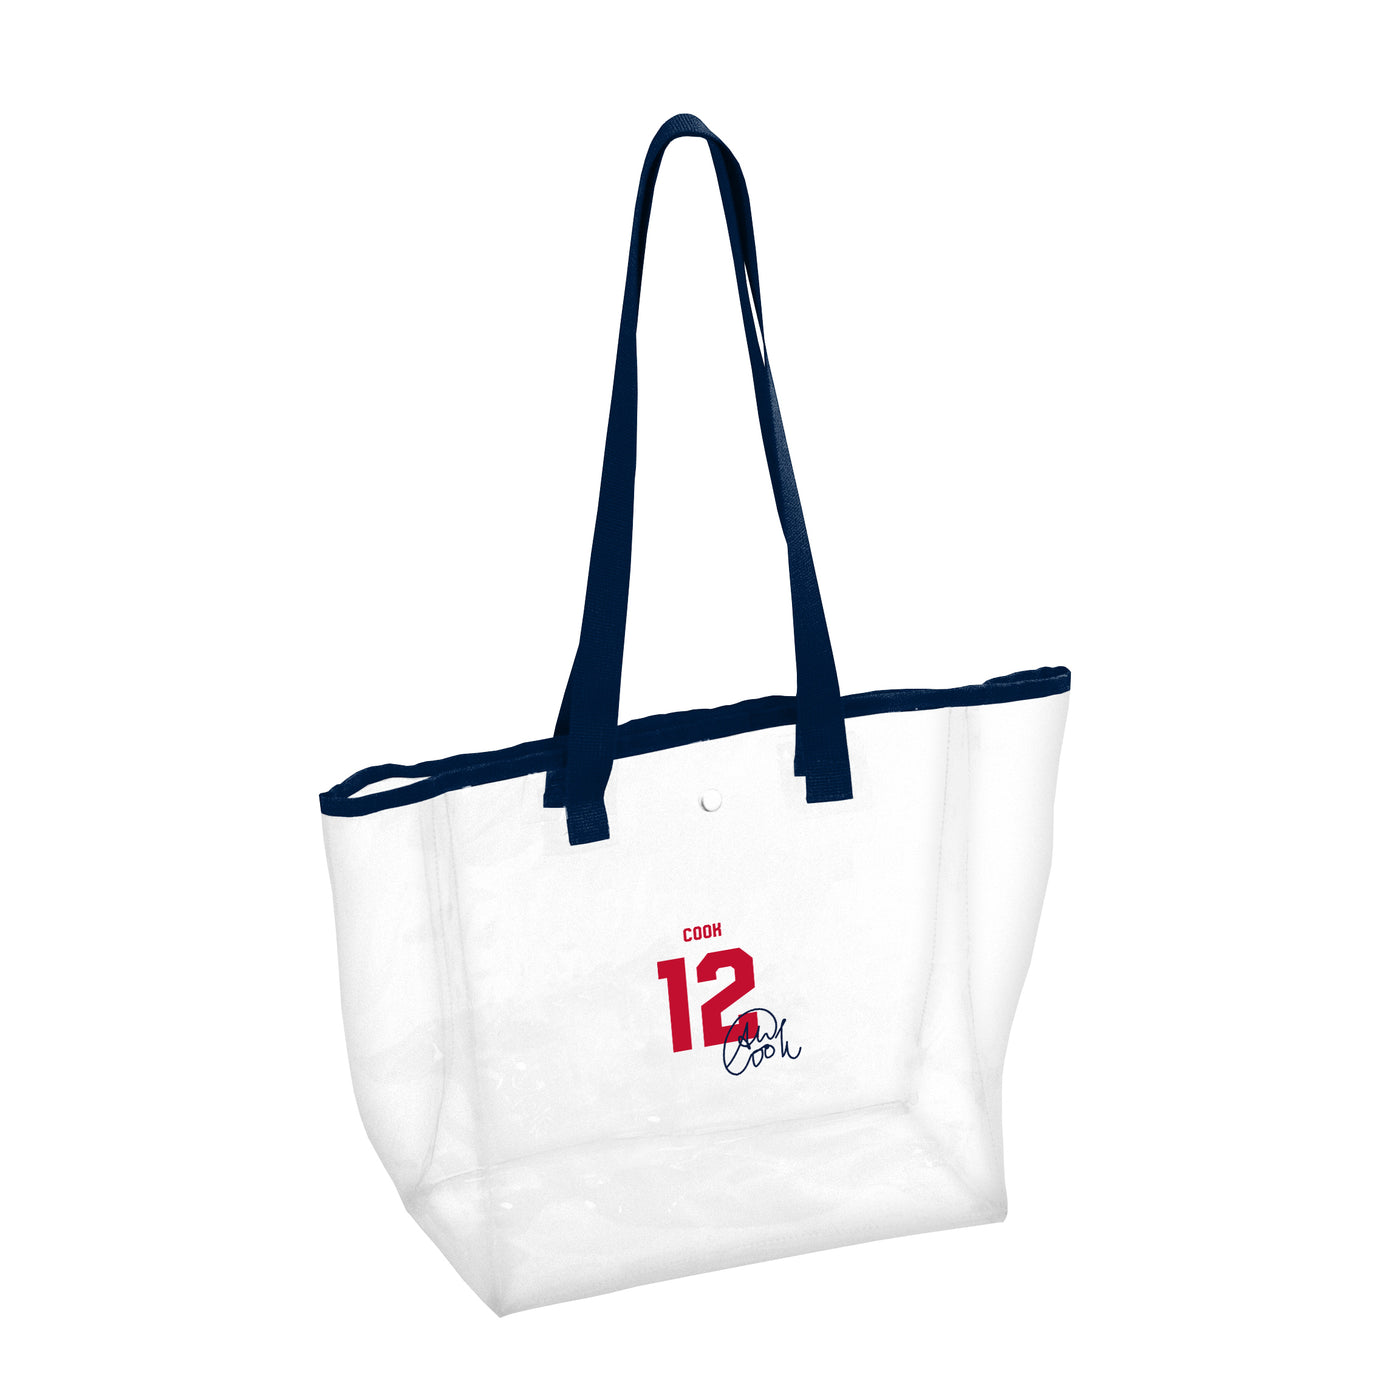 US Womens National Team Alana Cook Clear Tote